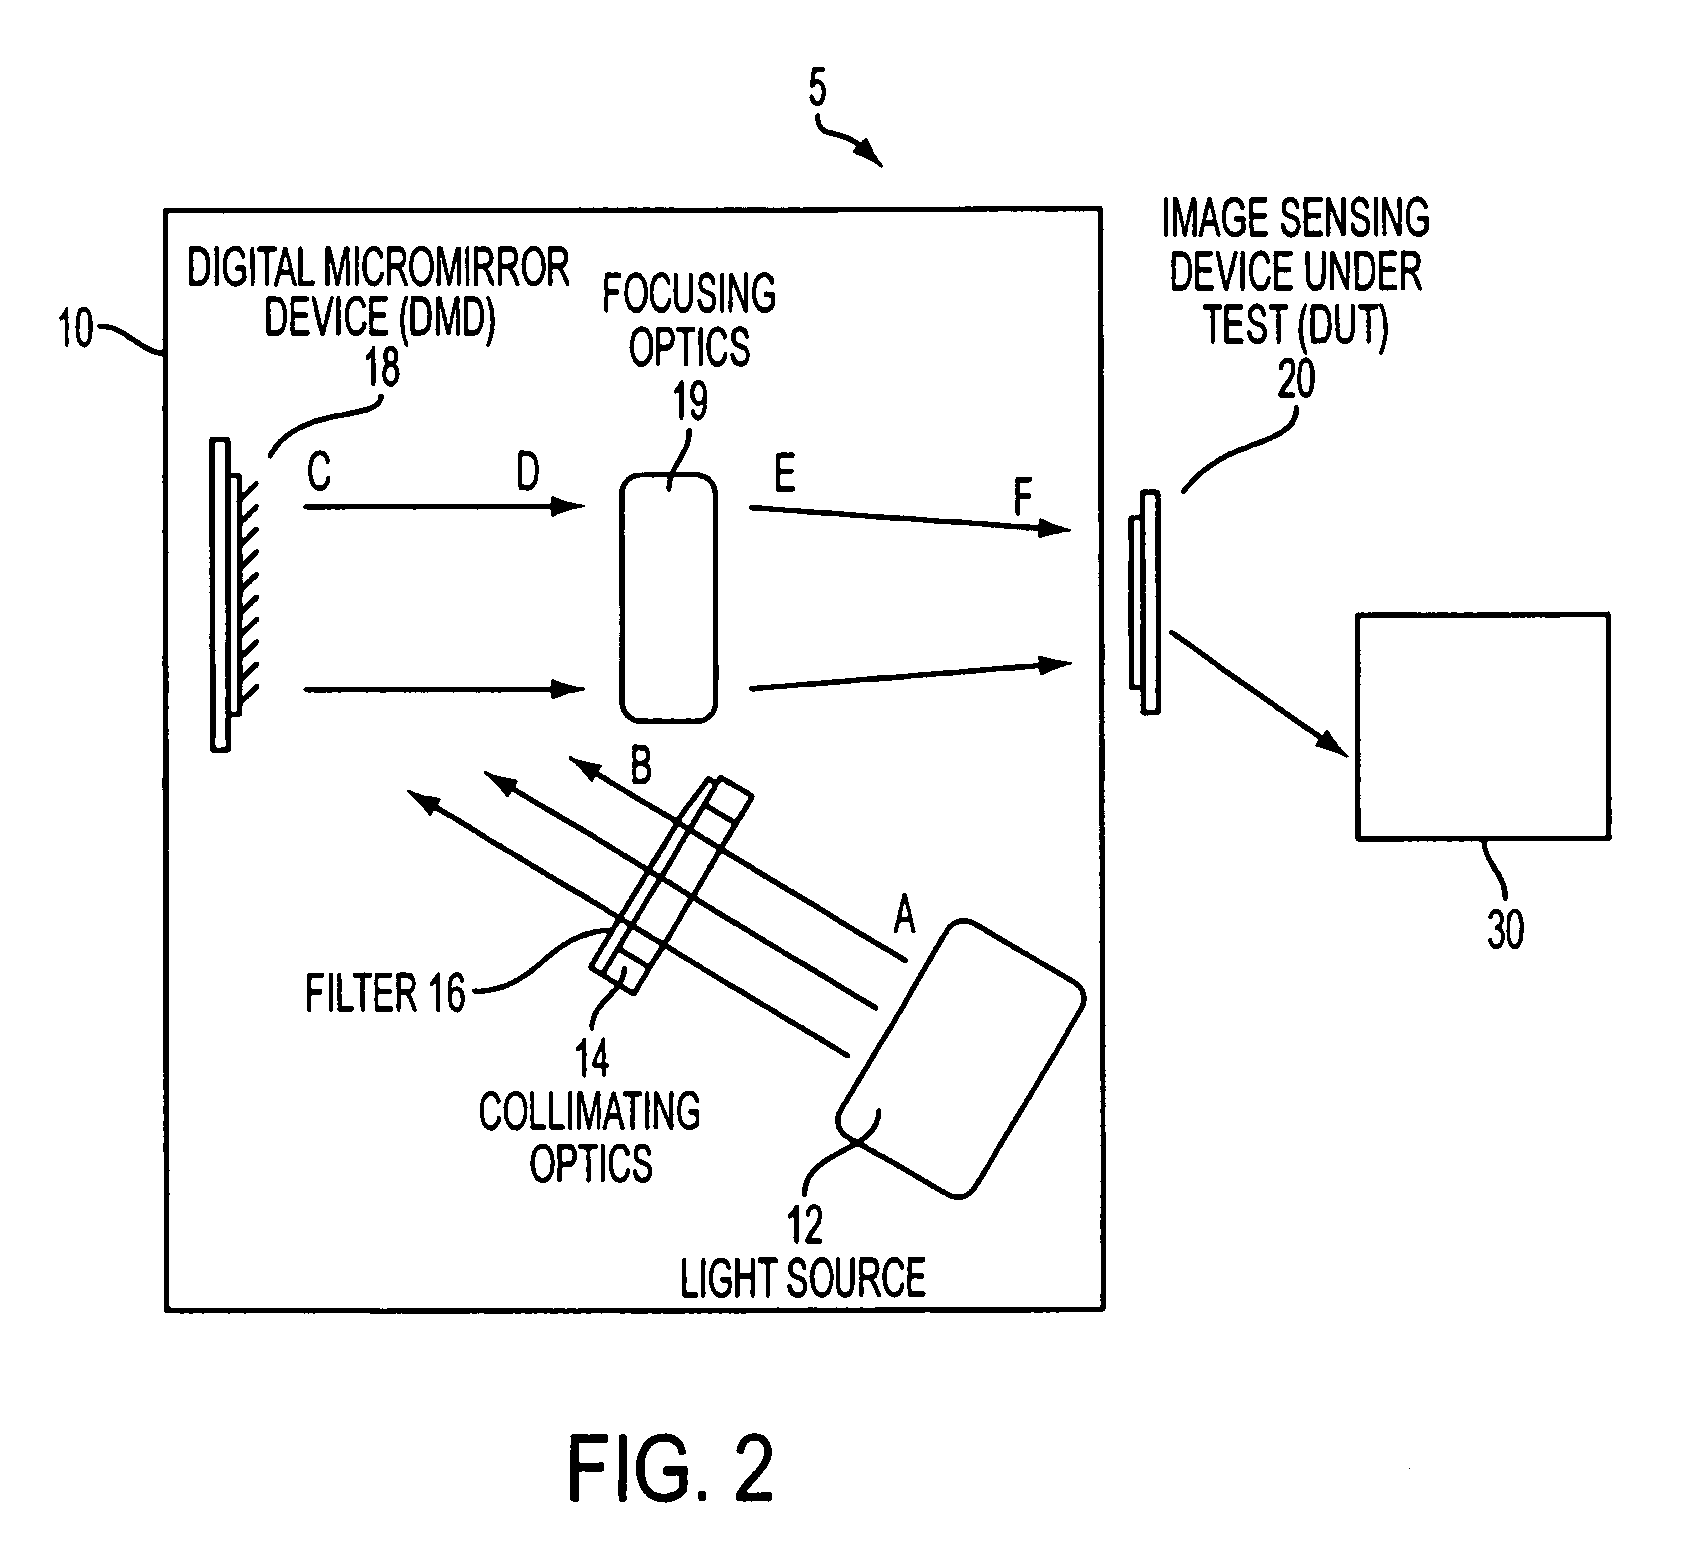 Method and apparatus for testing image sensors